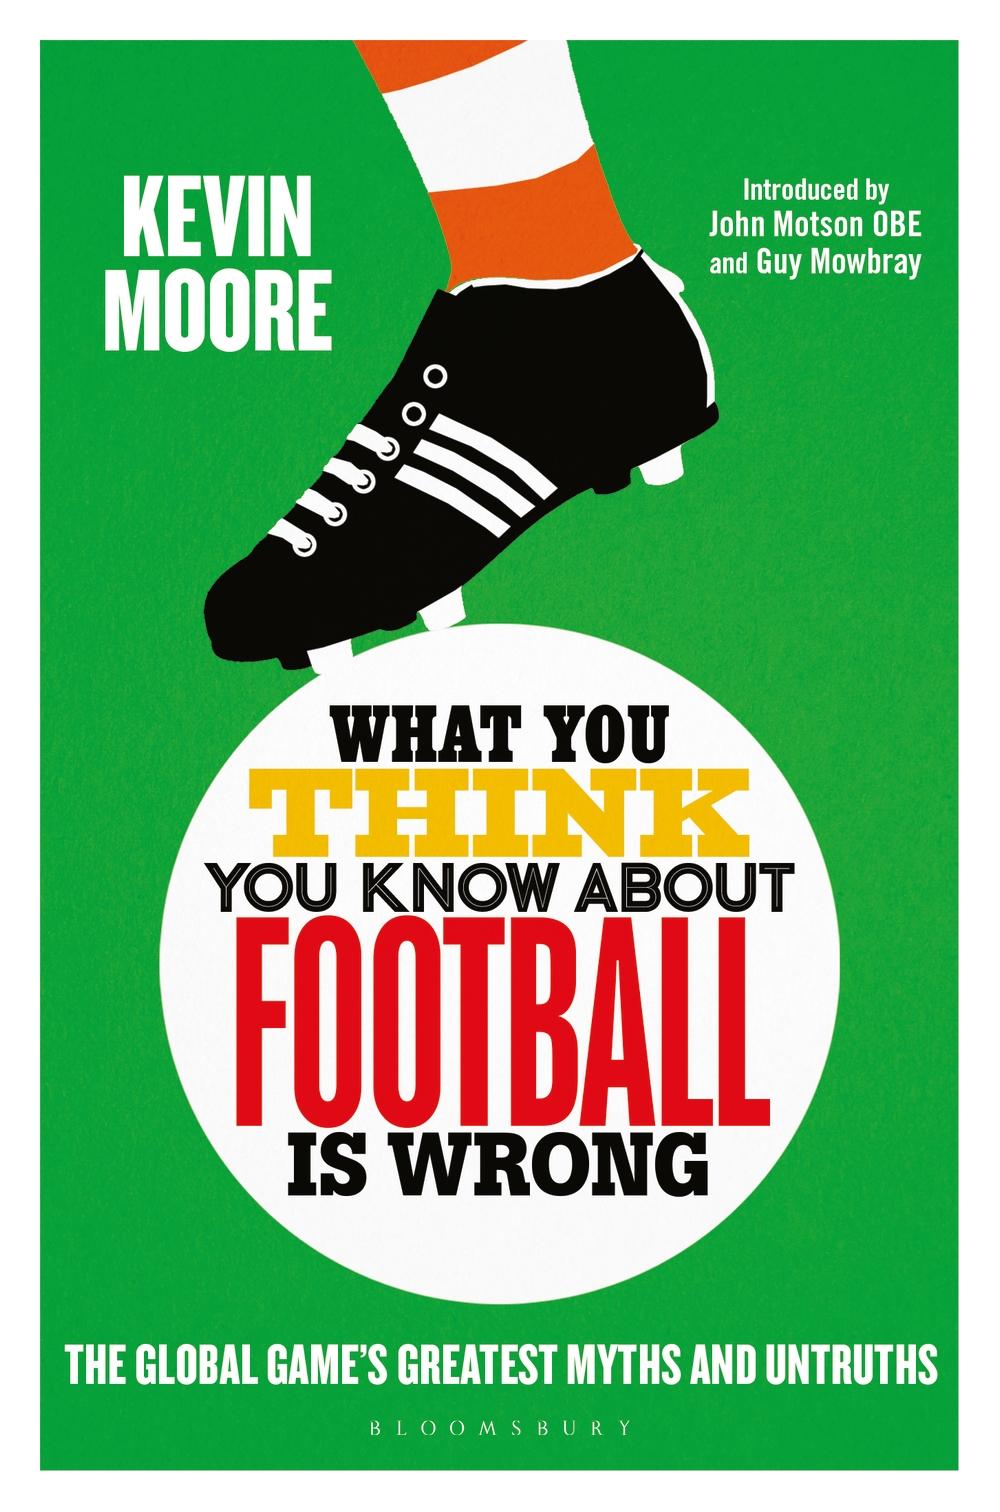 What You Think You Know About Football is Wrong - Kevin Moore